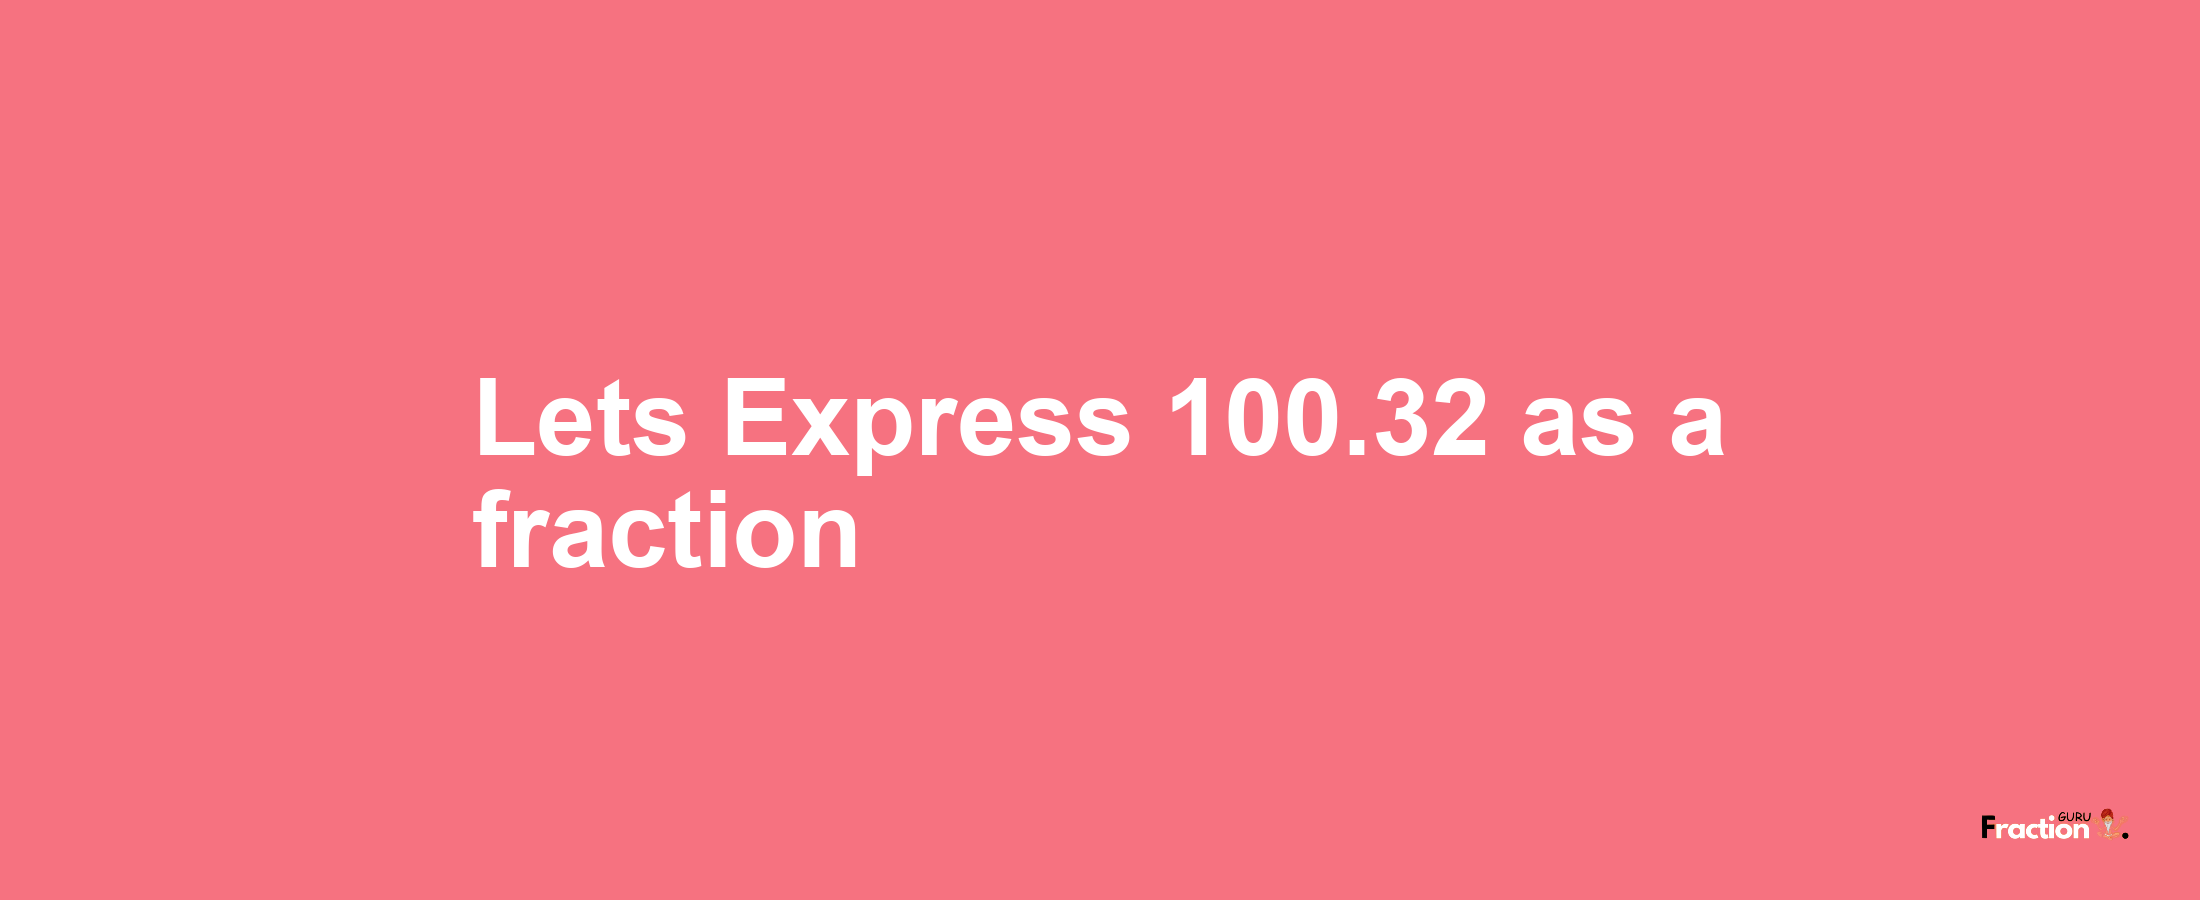 Lets Express 100.32 as afraction